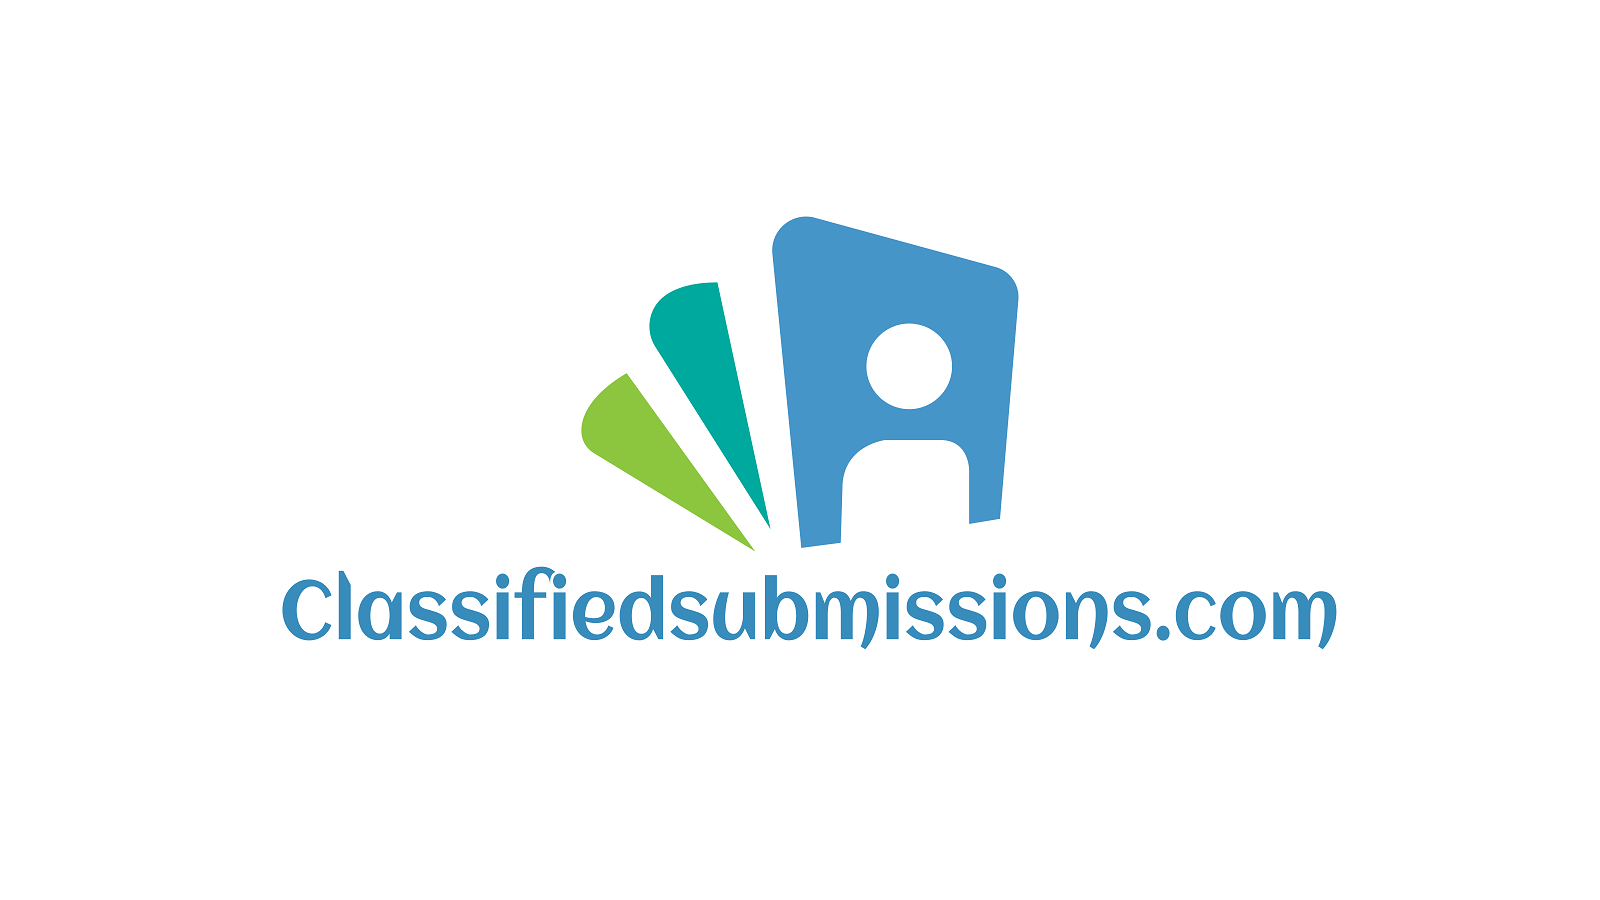 Classifiedsubmissions.com Blog